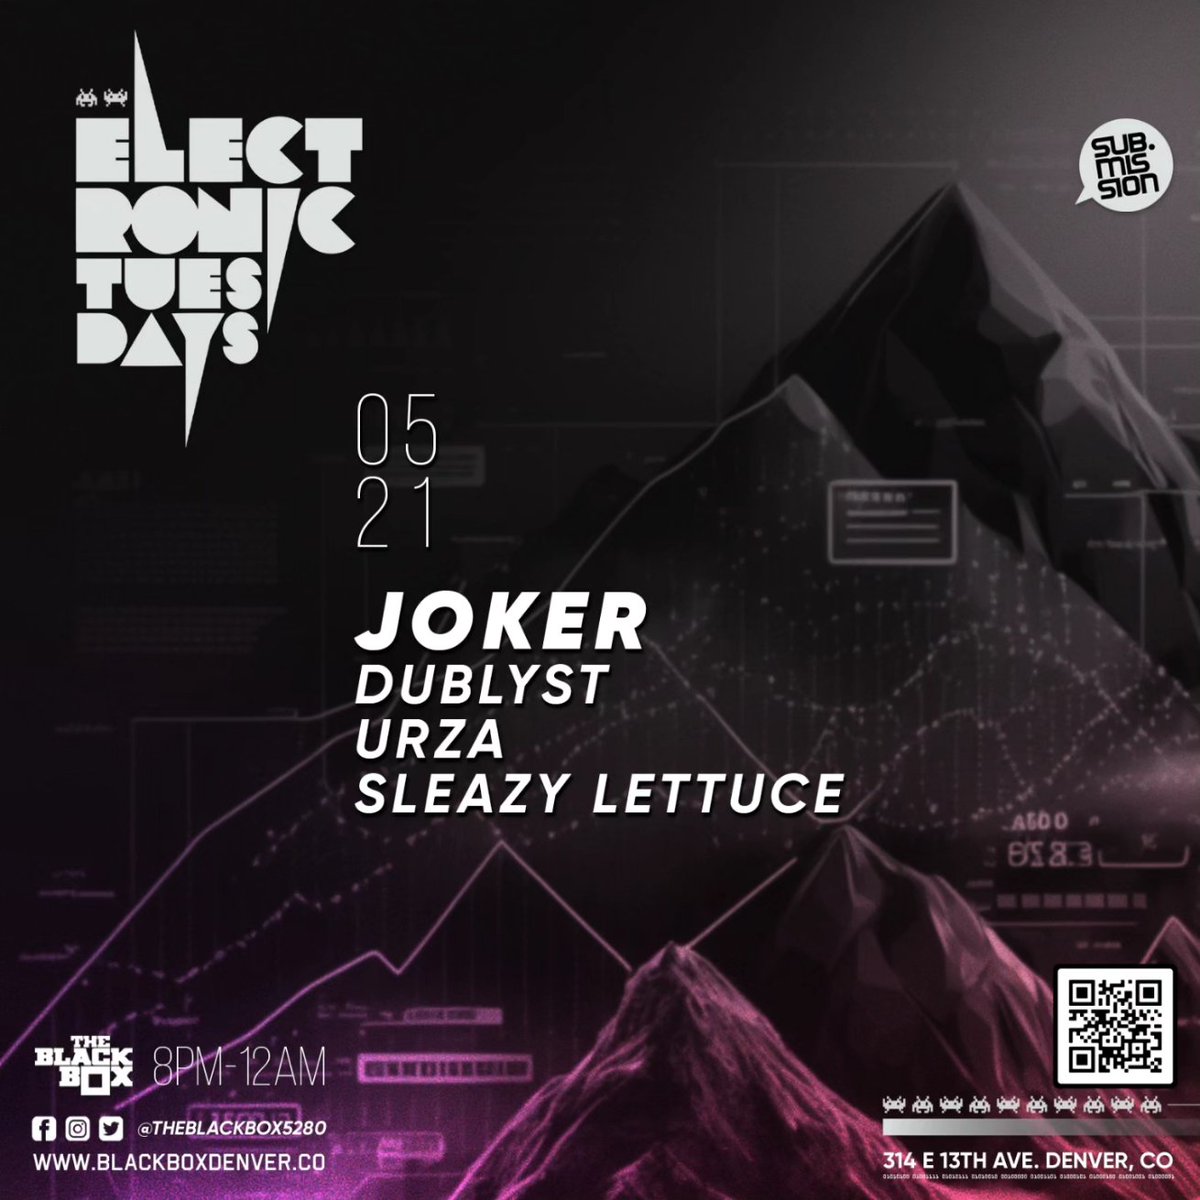 This week at @TheBlackBox5280 -- 05.21 Sub.mission presents Electronic Tuesdays: @Joker Weekly DJ Battle: Dublyst vs Urza vs. Sleazy Lettuce -- 🎟: bit.ly/SubmissionMay21